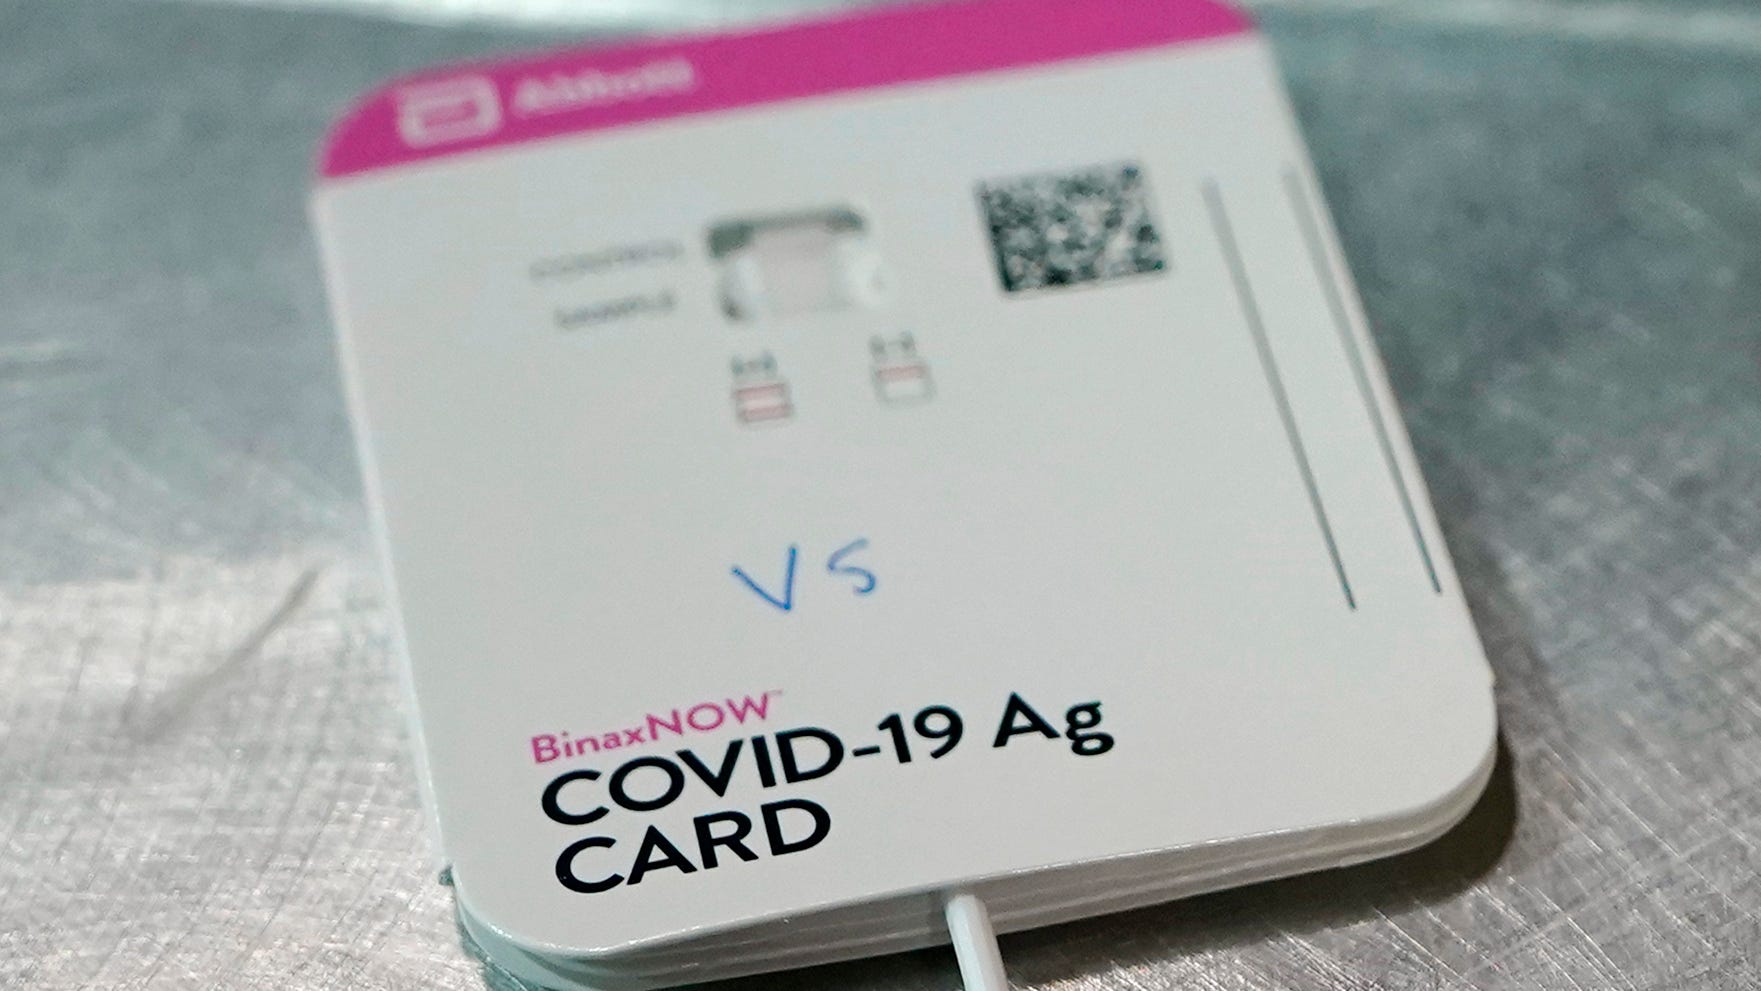 Where to buy PCR and antigen athome COVID test kits